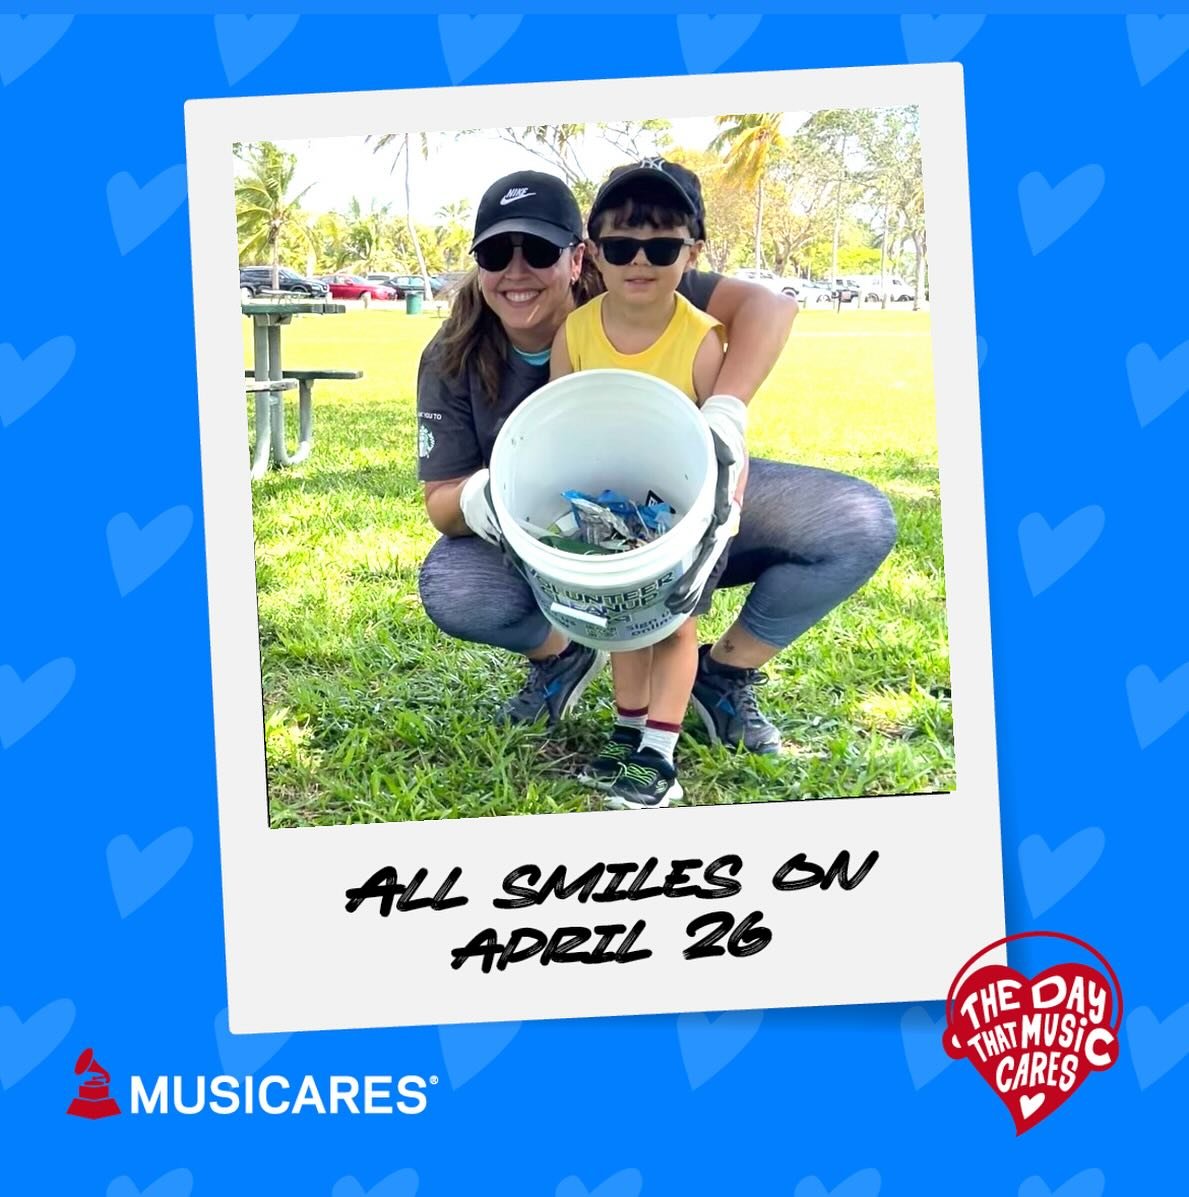 Today is #TheDayThatMusicCares, and the perfect way to mark the occasion is by coming together to do a @volunteercleanup ❤️

I&rsquo;m thrilled about this initiative by @latingrammys and @musicares, and I feel privileged to share this experience with